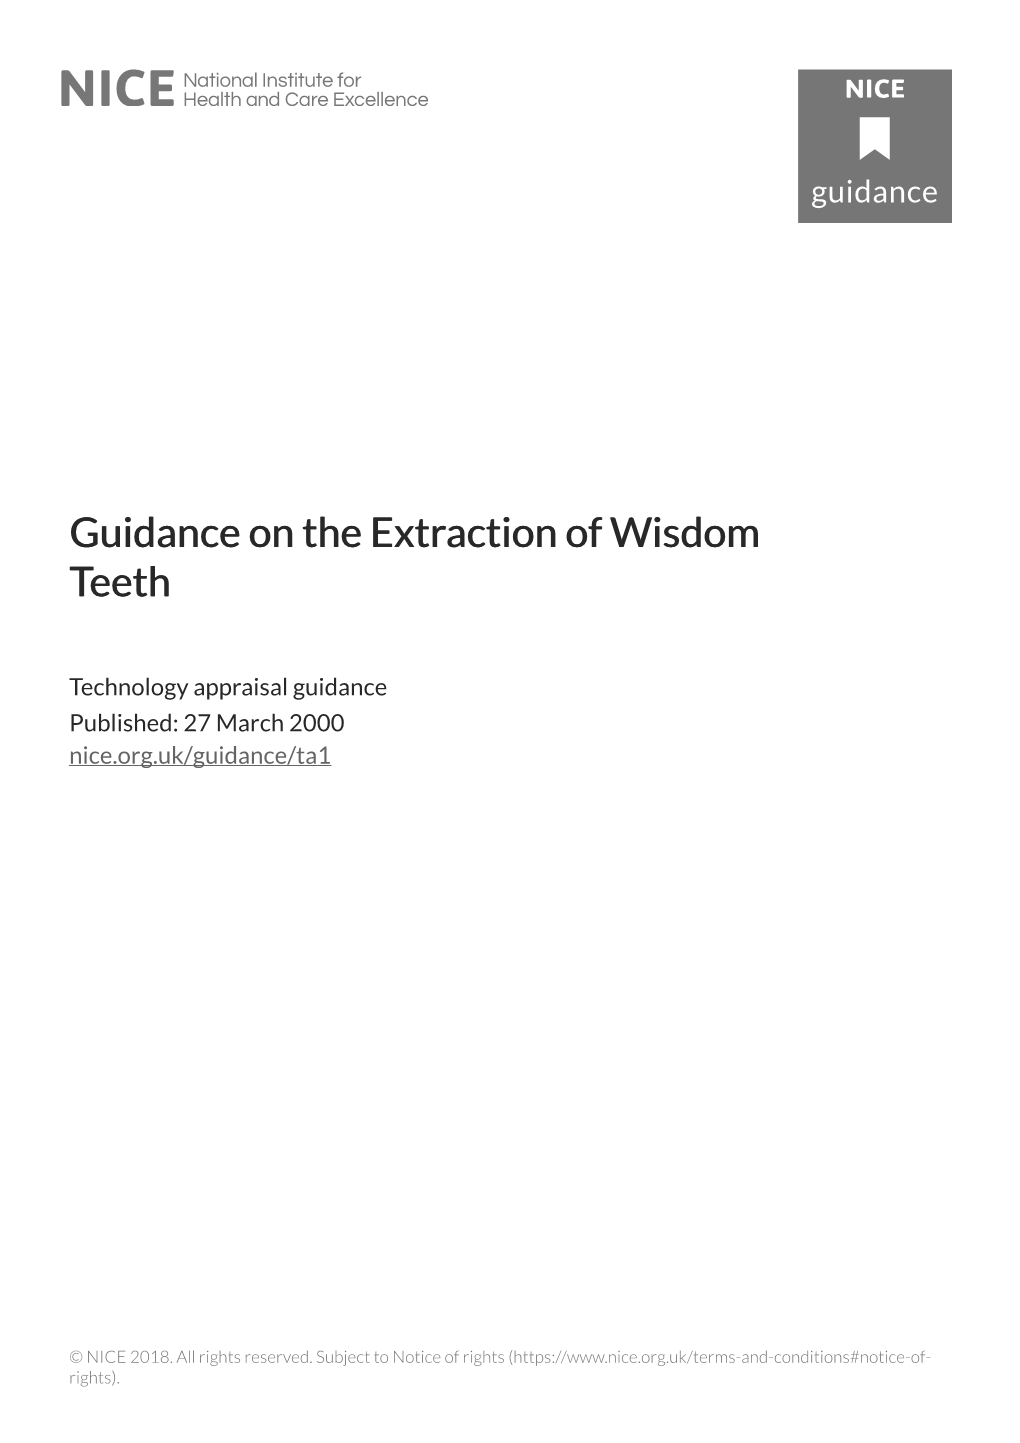 Guidance on the Extr Guidance on the Extraction of Wisdom Action of Wisdom Teeth